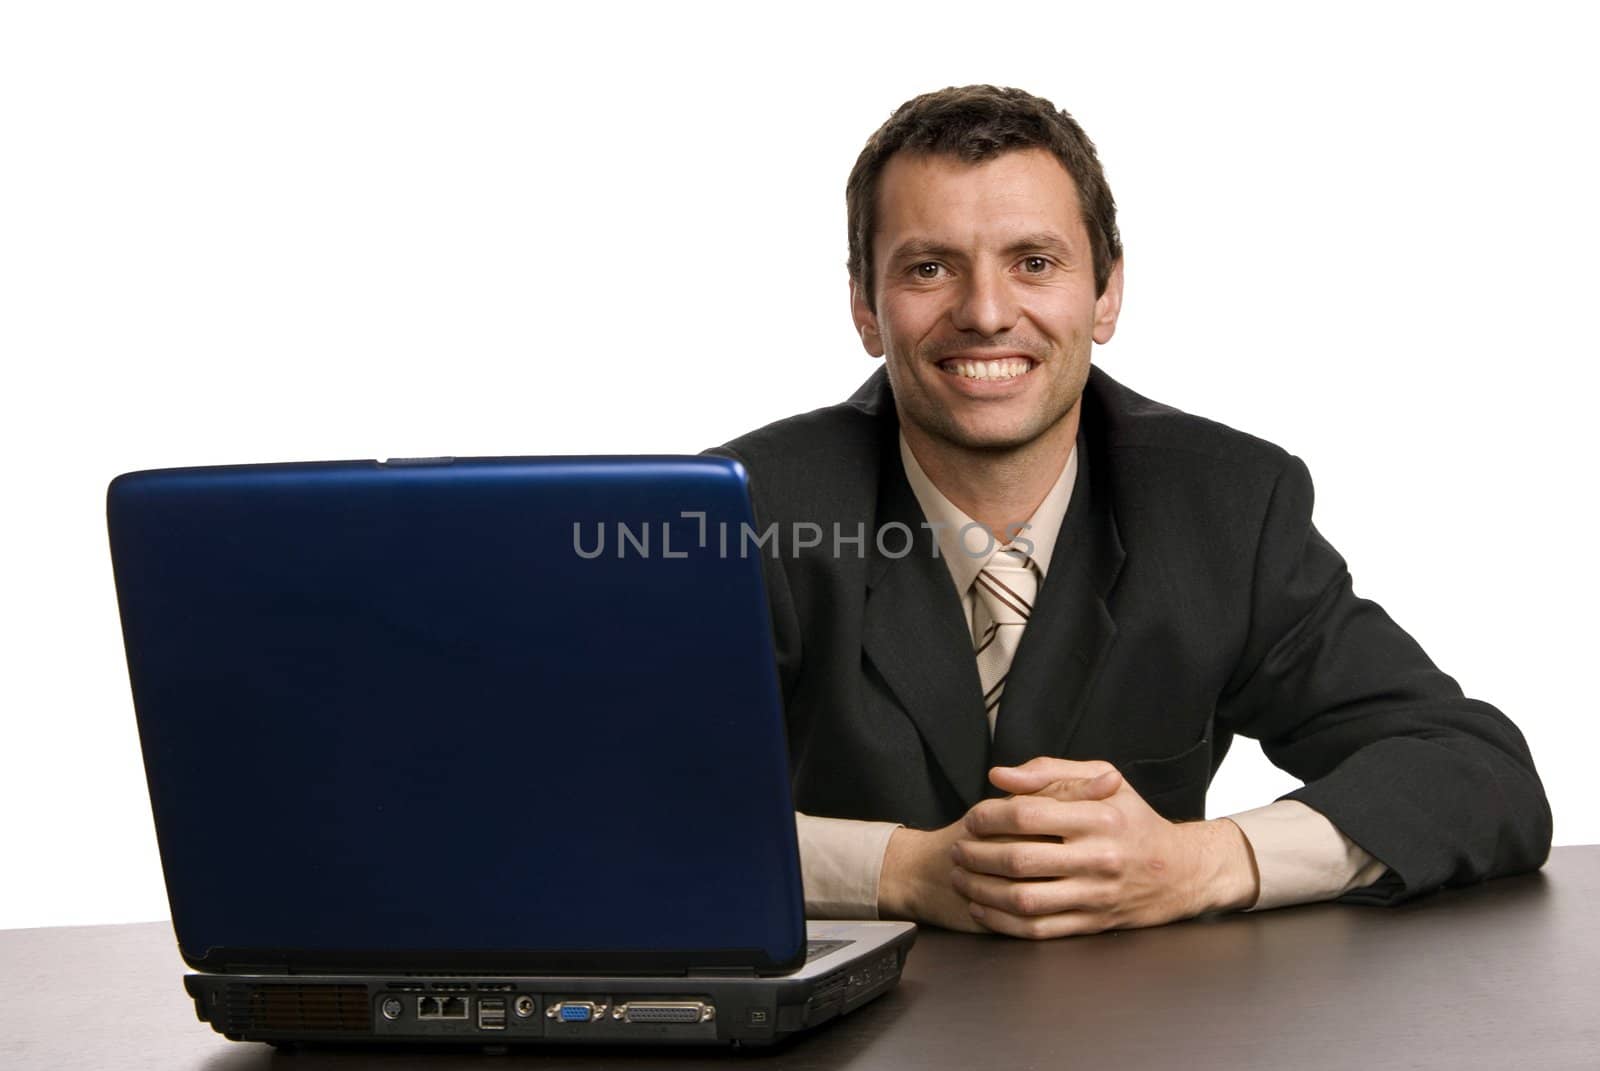 young man wondering and working with is laptop